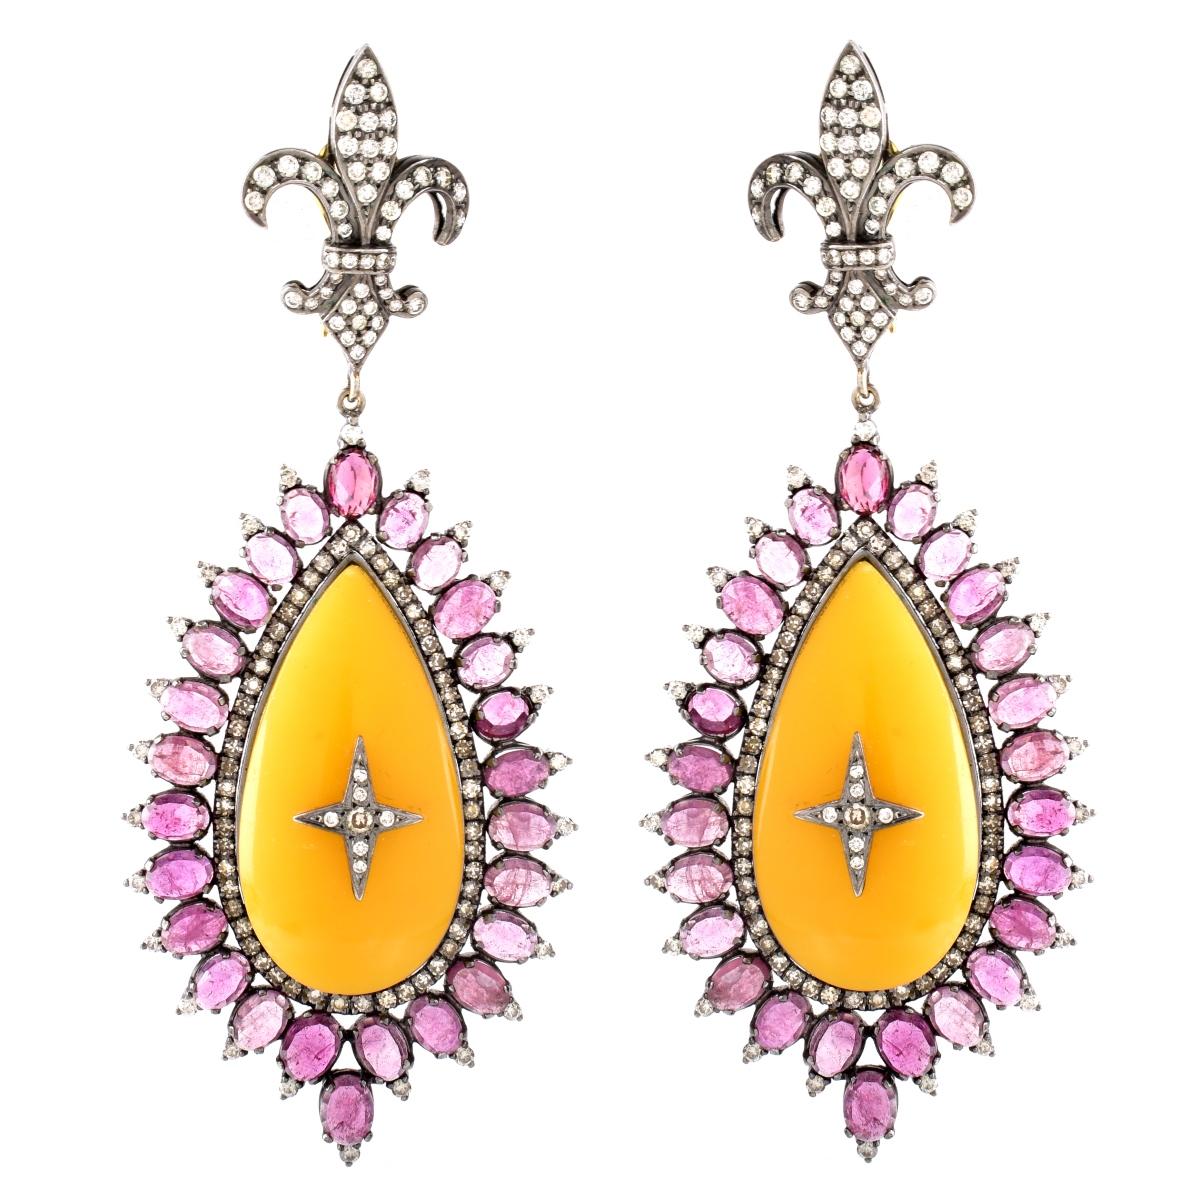 Antique Diamond, Ruby and 18K Gold Earrings